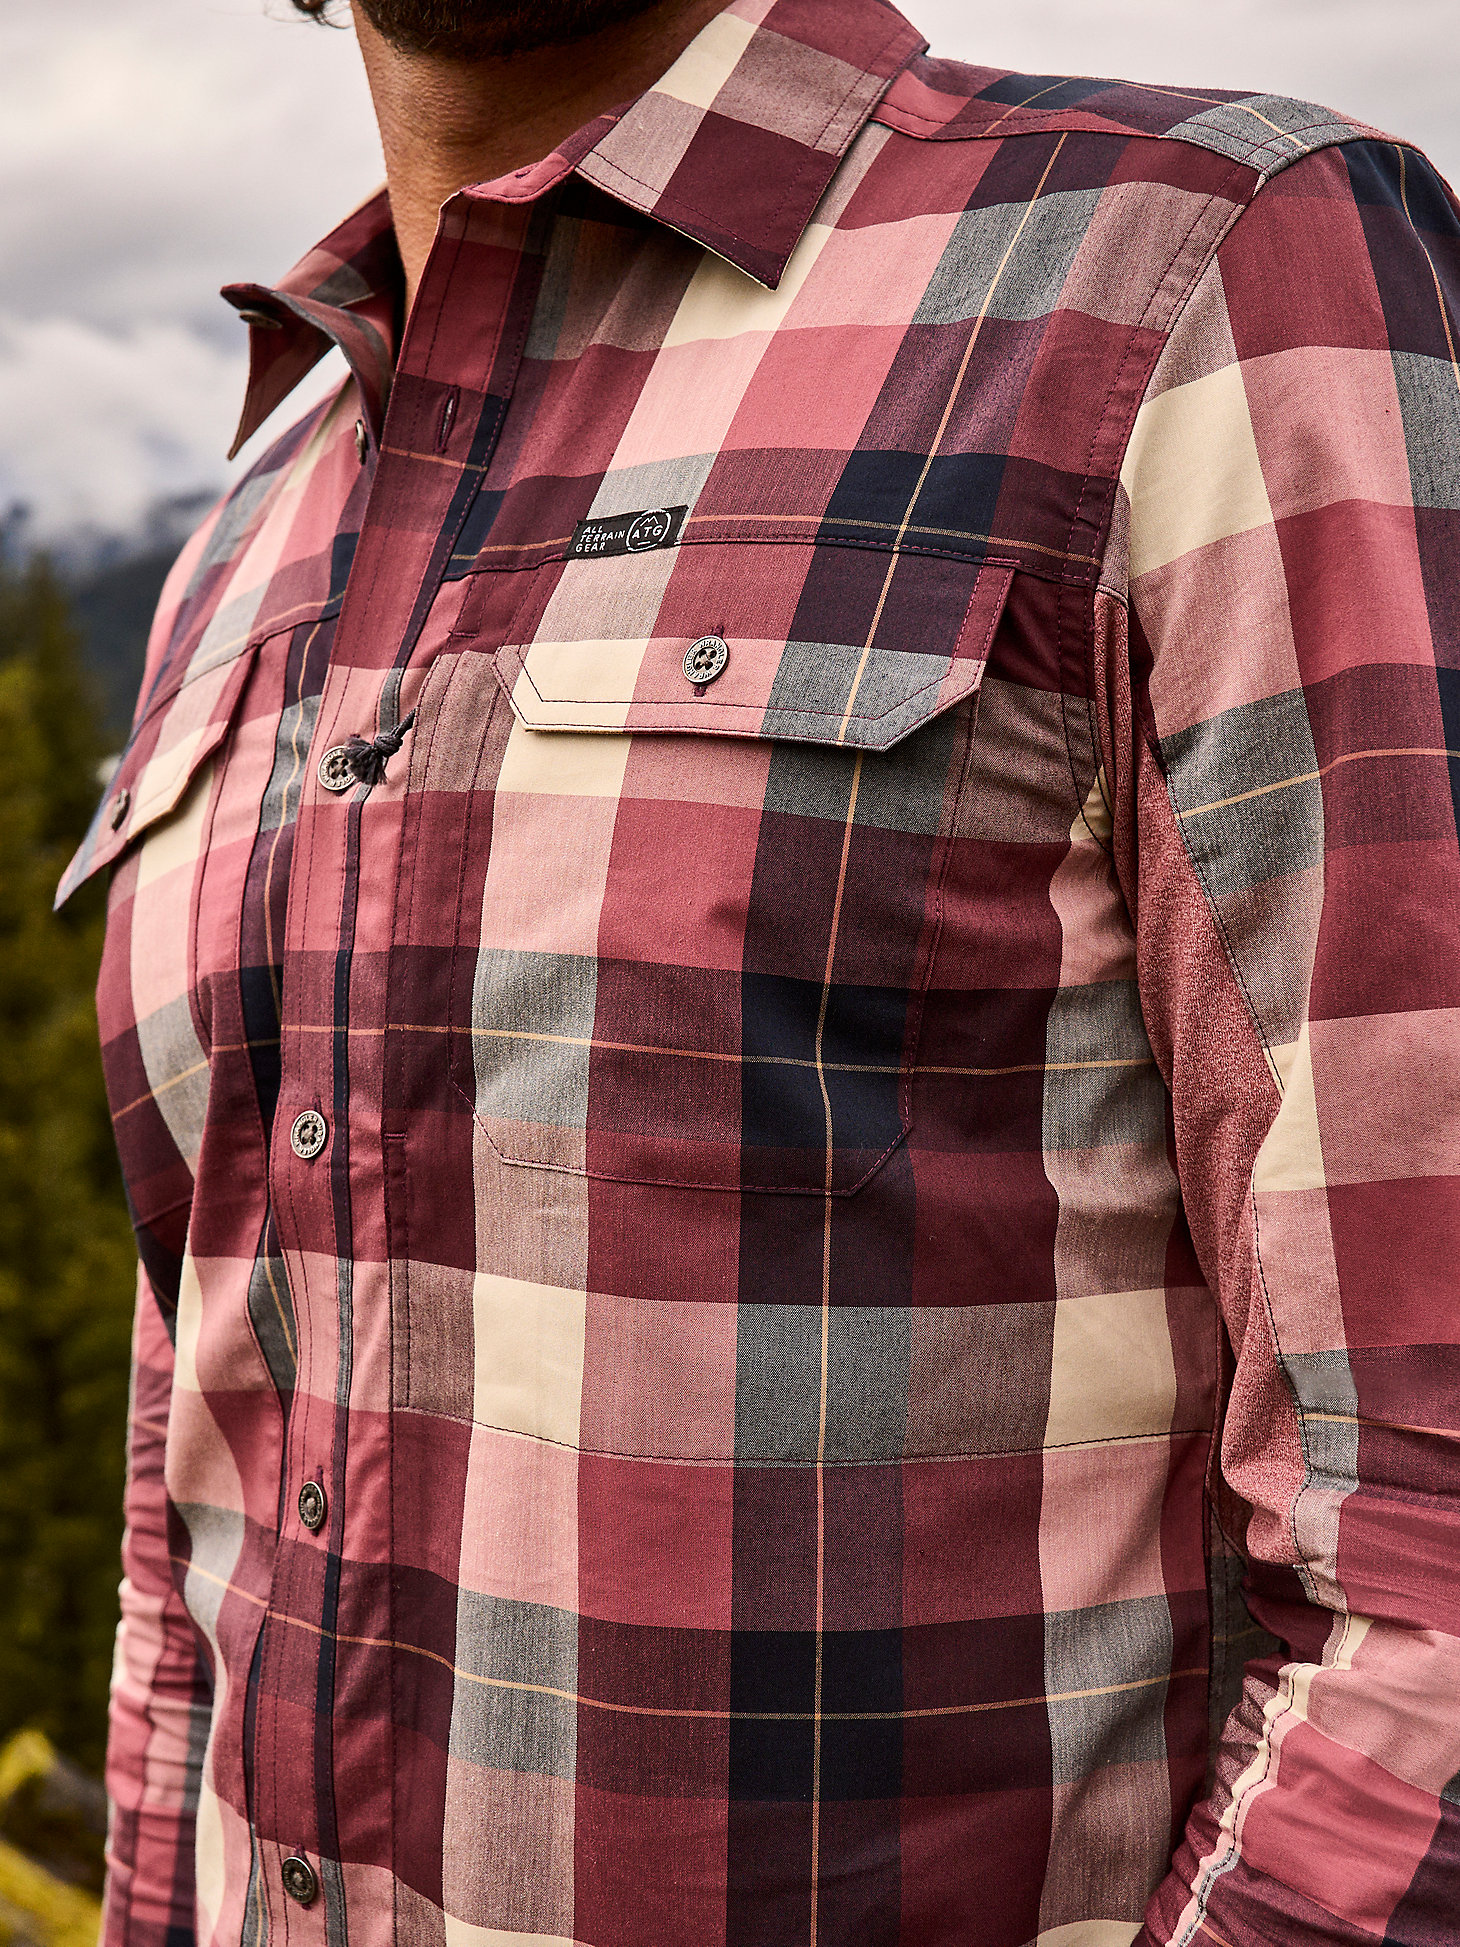 ATG By Wrangler™ Plaid Mixed Material Shirt in Beagle Apple Butter alternative view 1